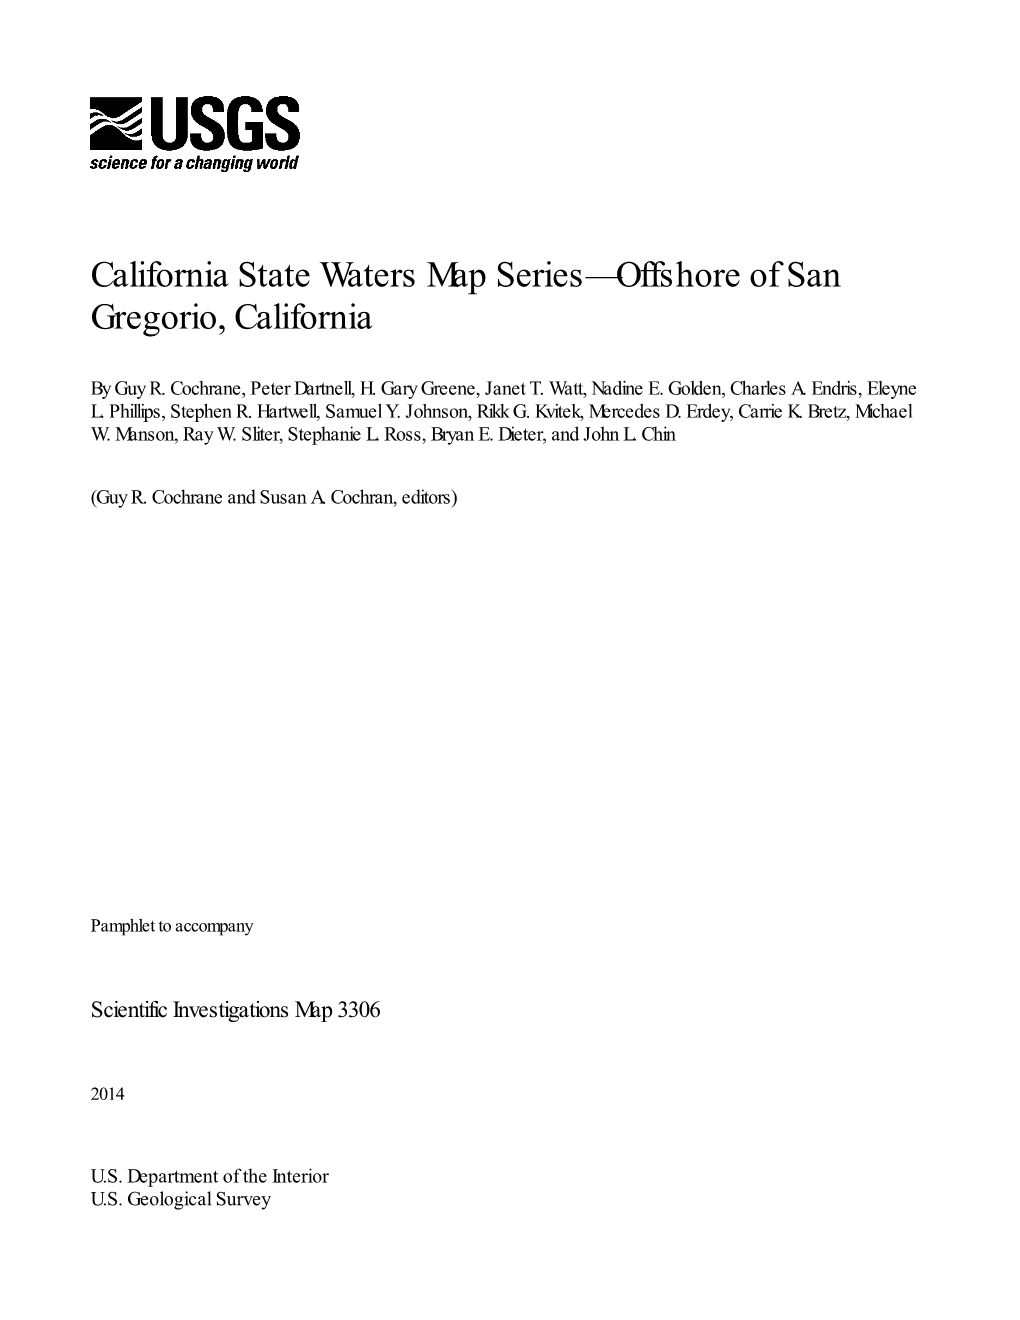 California State Waters Map Series: Offshore of San Gregorio, California